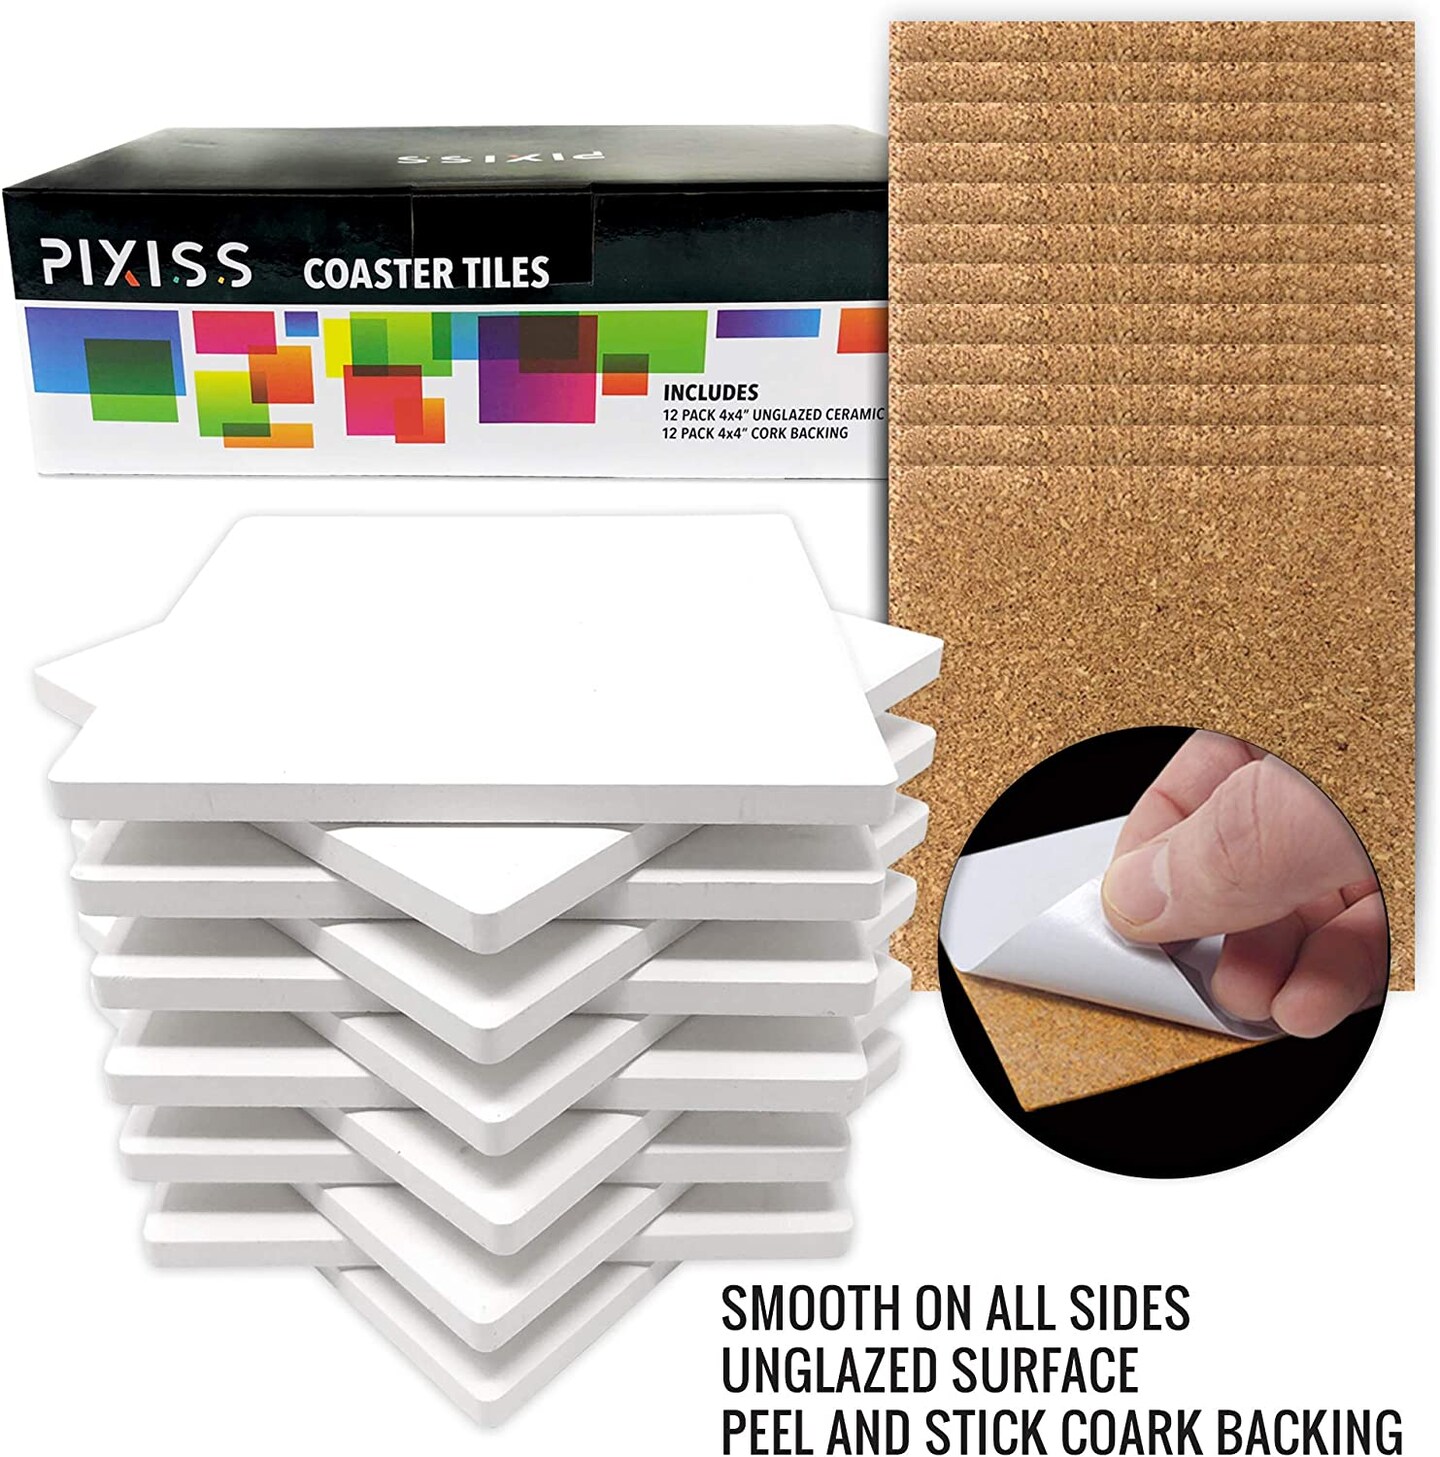 Pixiss 100 Pack Square Ceramic White Tiles Unglazed 4x4 with Cork Backing Pads